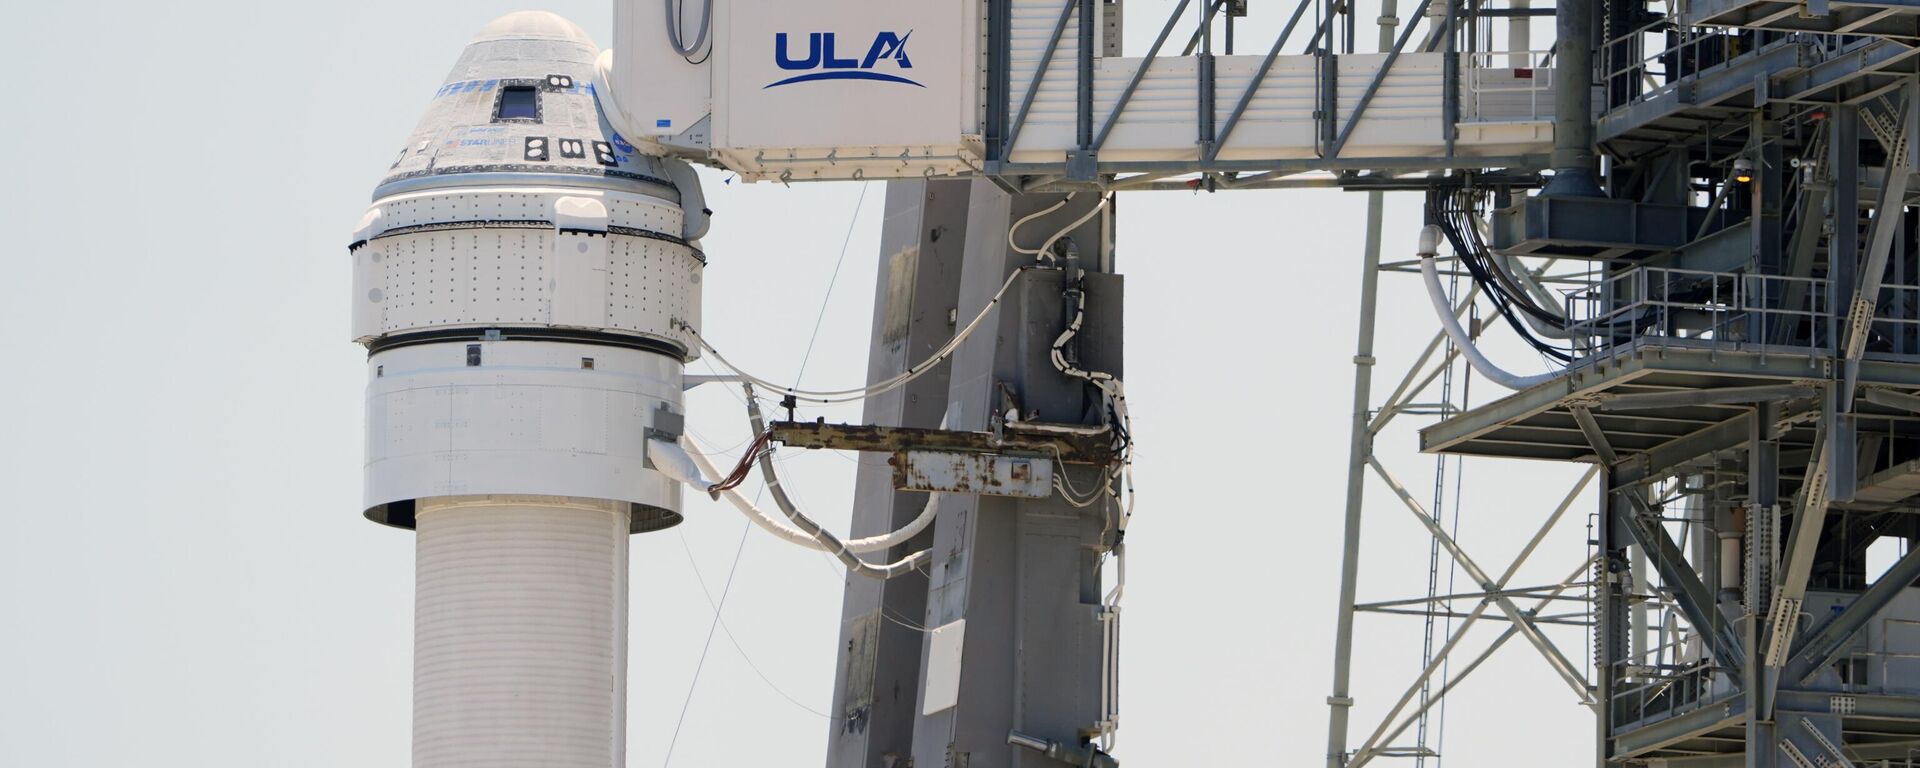 Boeing's Starliner capsule atop an Atlas V rocket is seen at Space Launch Complex 41 at the Cape Canaveral Space Force Station a day after its mission to the International Space Station was scrubbed because of an issue with a pressure regulation valve, Tuesday, May 7, 2024, in Cape Canaveral, Fla.  - Sputnik Africa, 1920, 11.05.2024